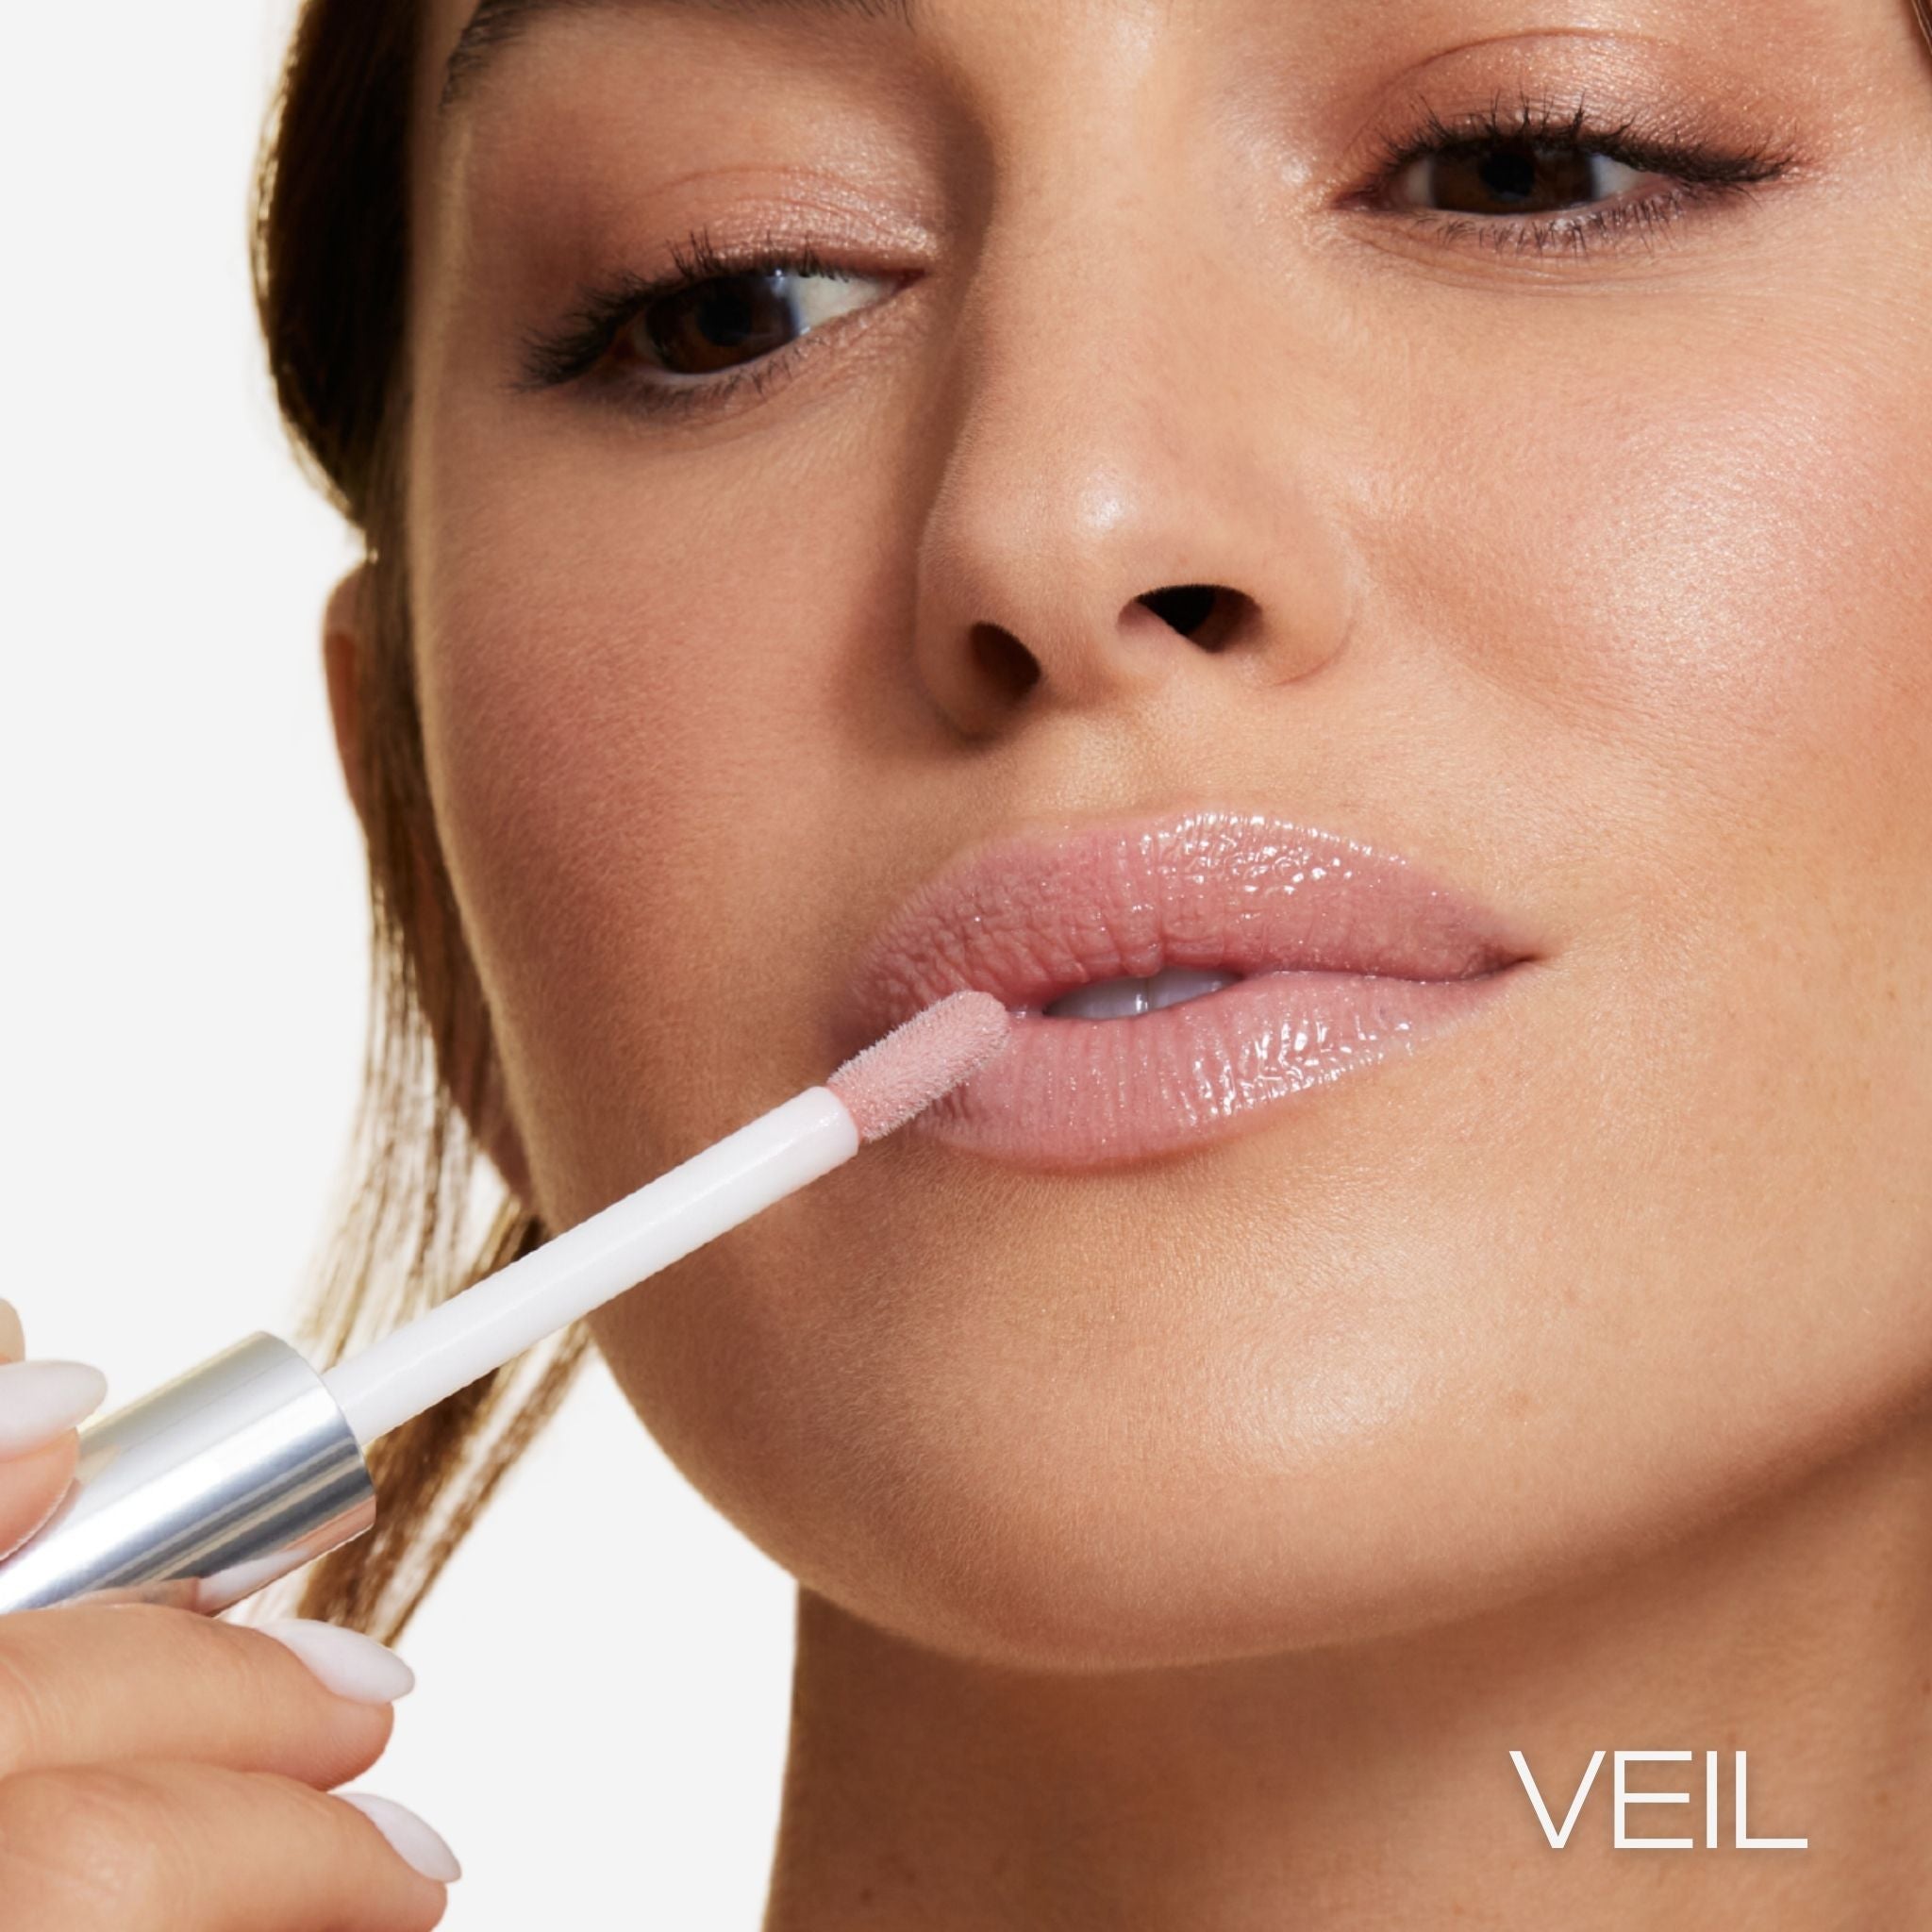 Previously known as beige frosted, our favorite lip gloss has been renamed to veil. Now infused with shea butter AND hyaluronic acid. Photo of model applying gorgeous nude color to lips